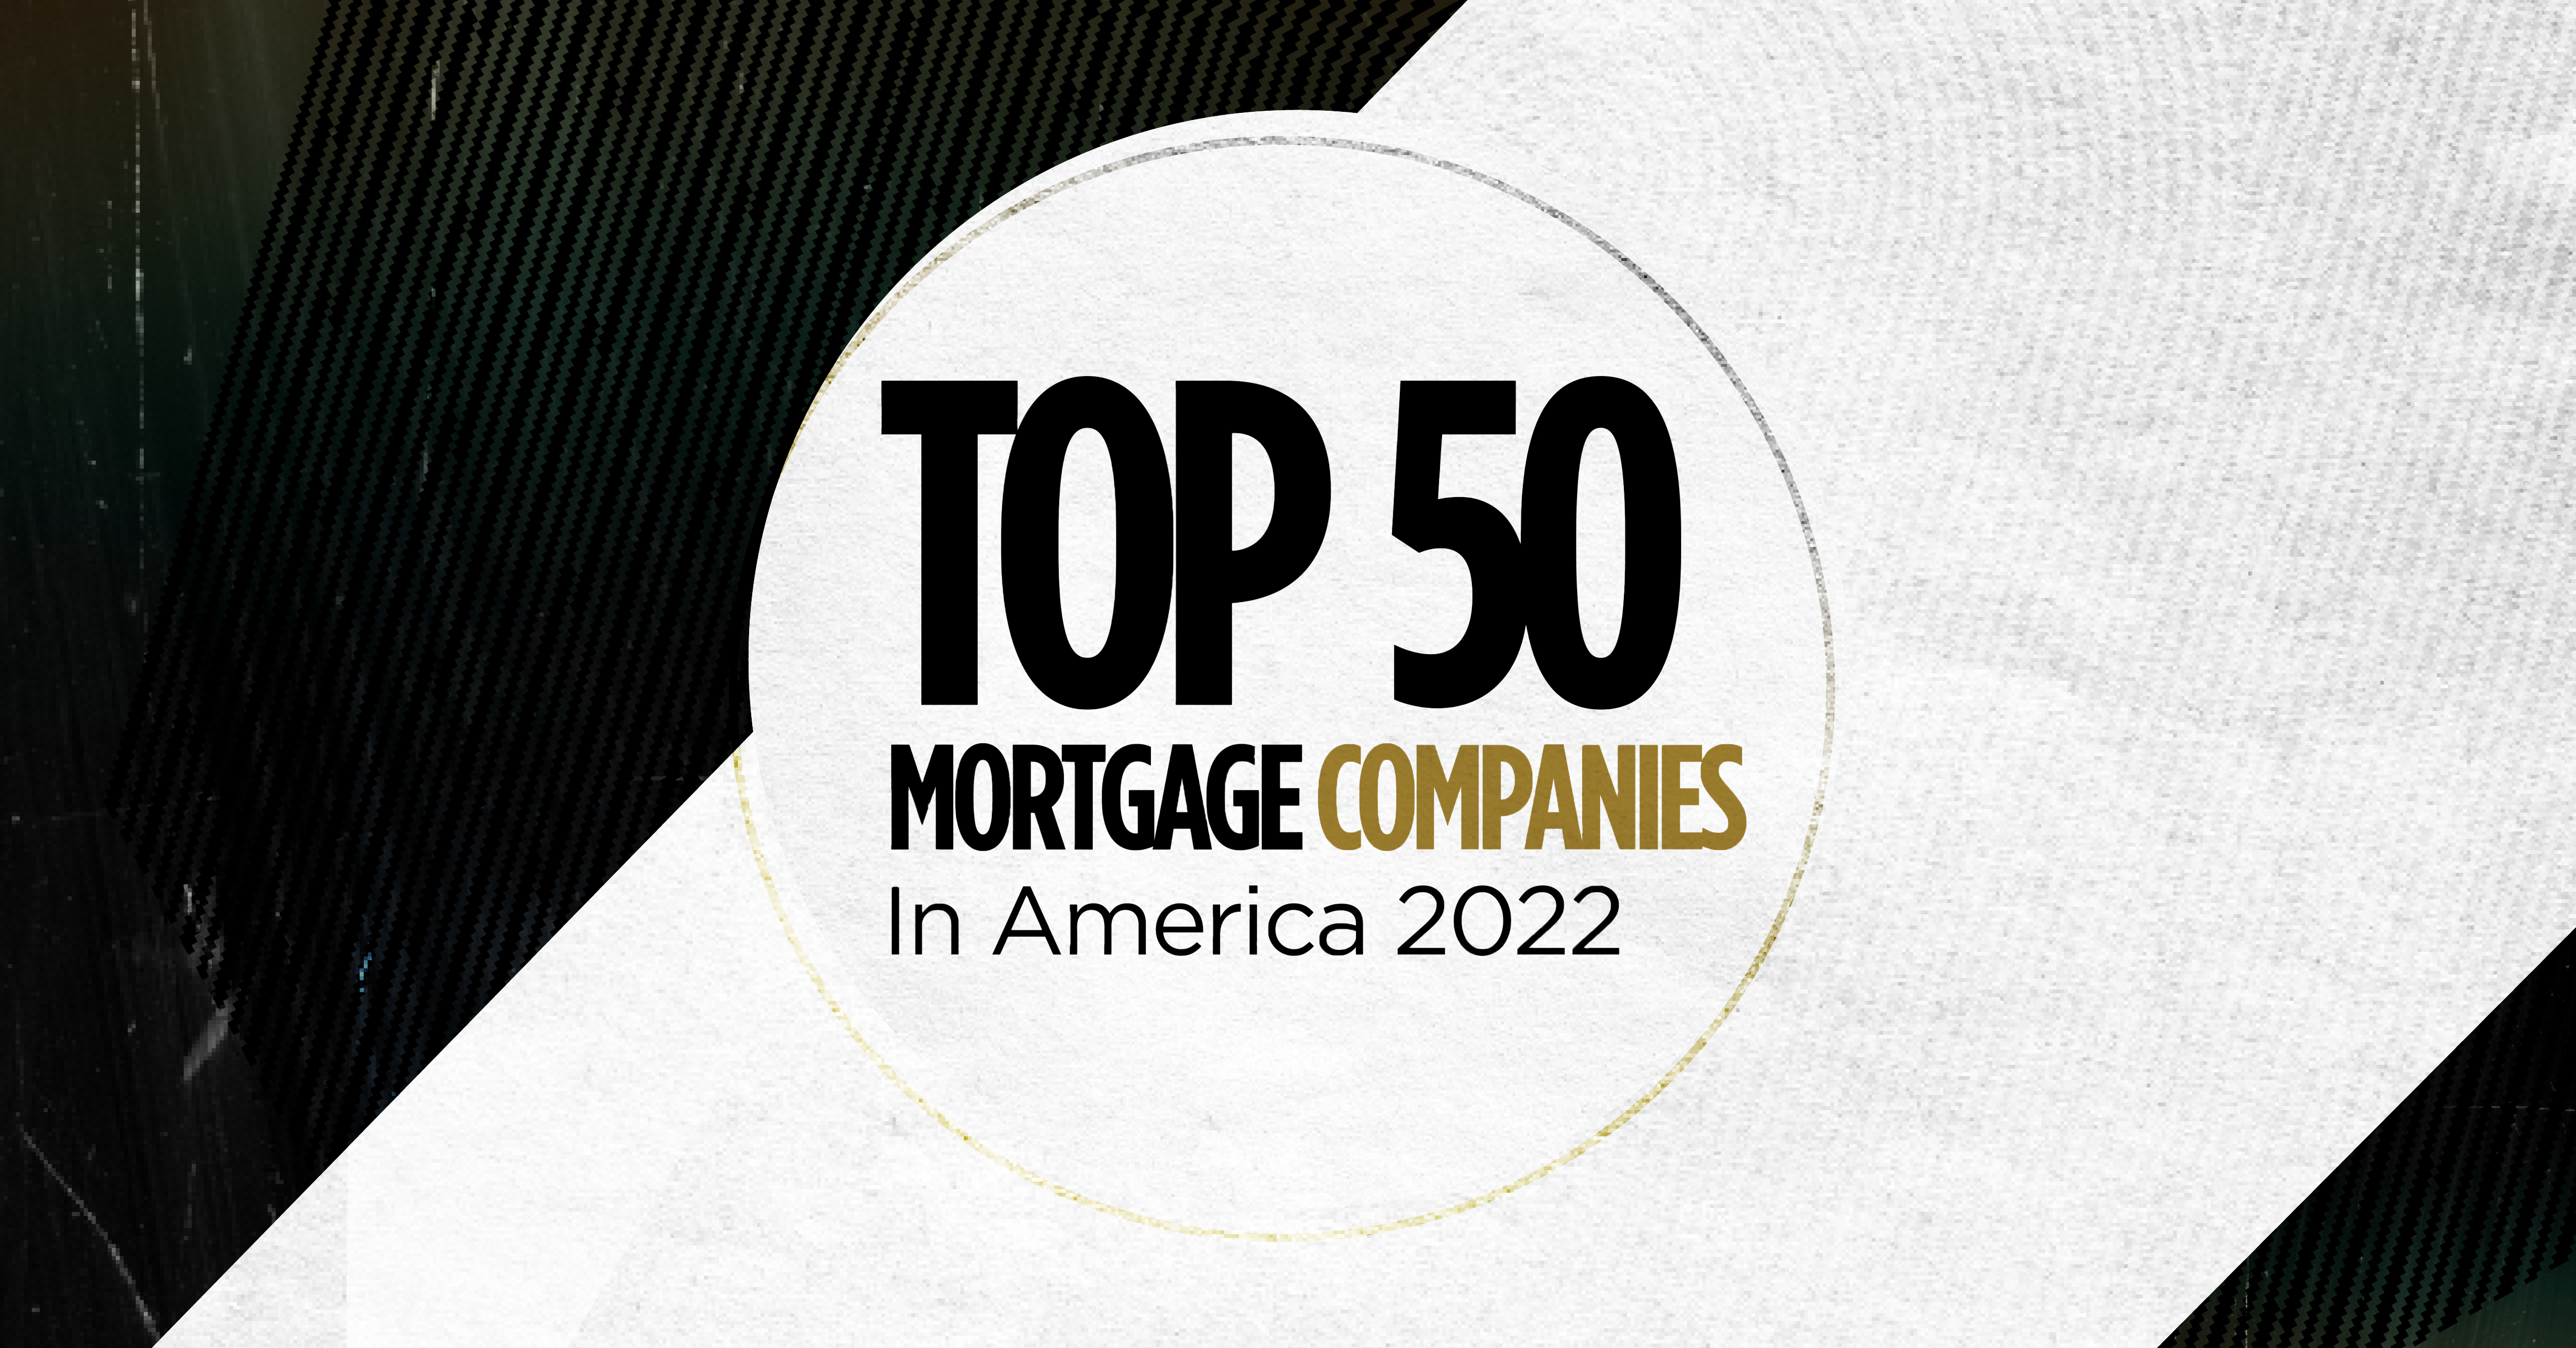 Homeowners Financial Group Ranks Among the Top 50 Mortgage Companies in America for 2022